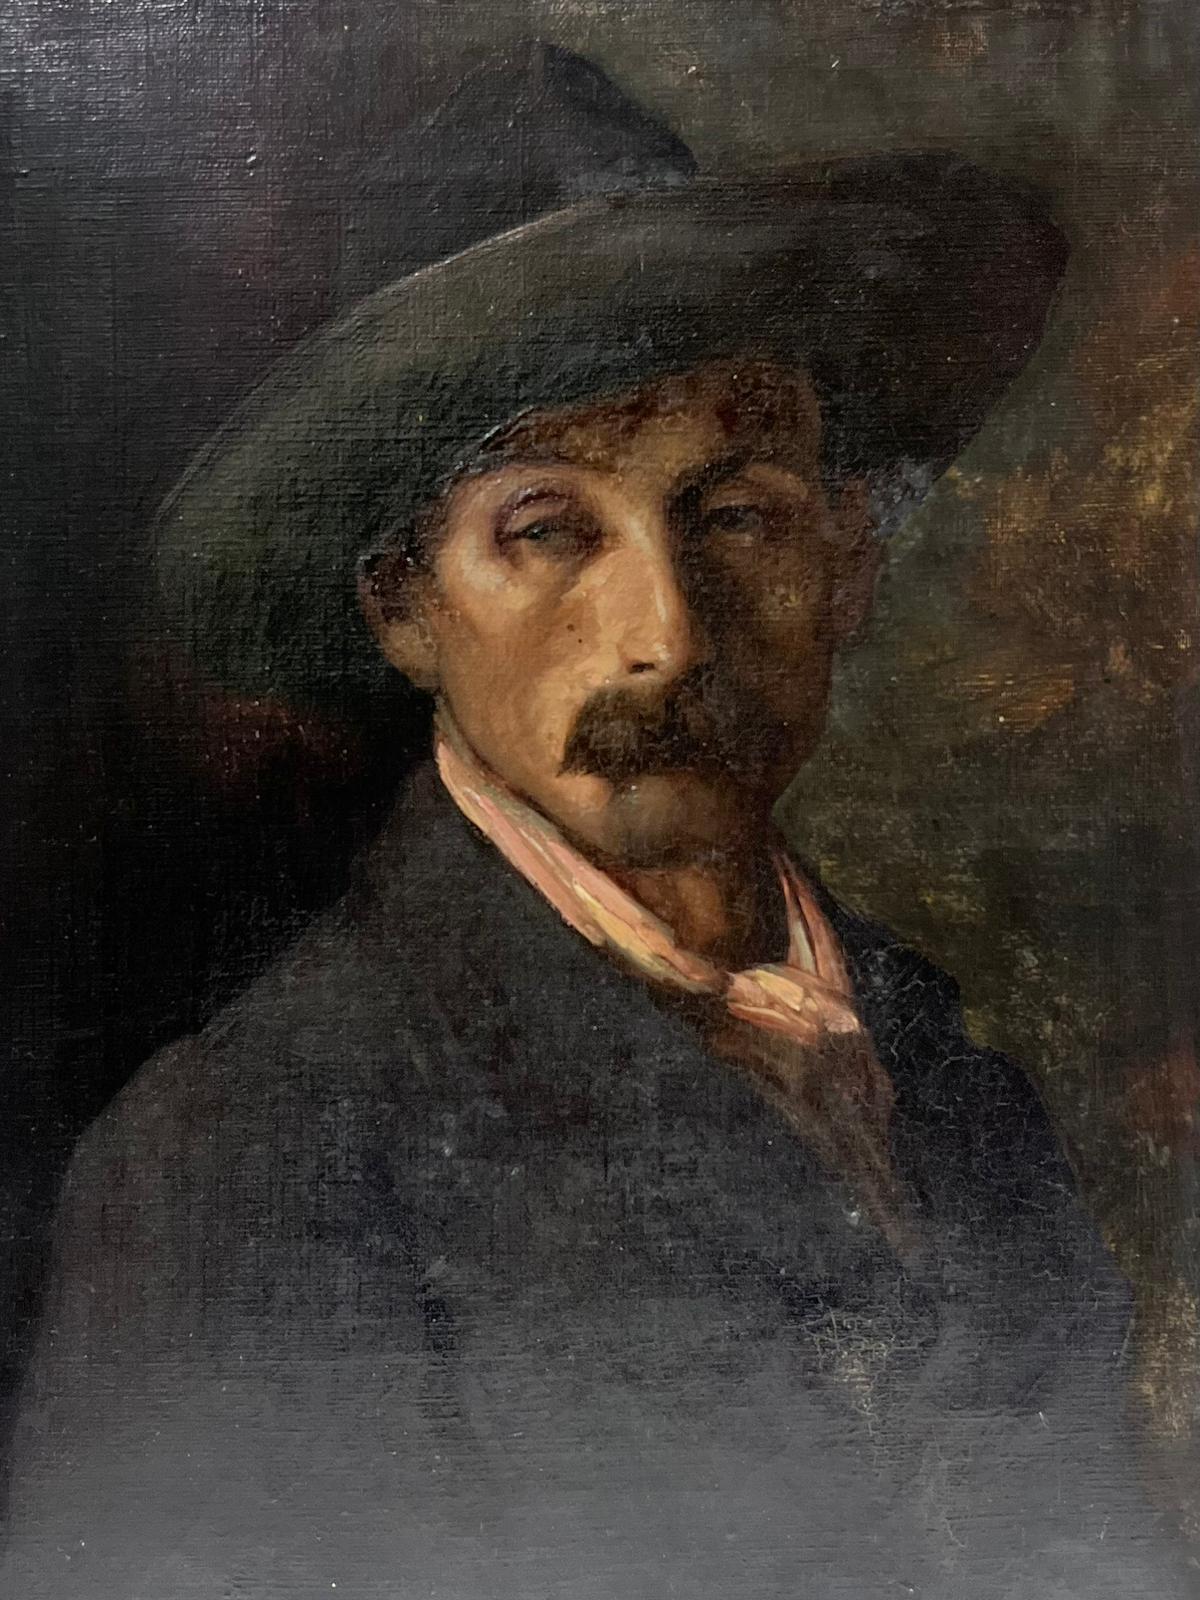 French/ German 19th century Portrait Painting - 1880's German/ French Impressionist Oil Painting Portrait of Man with Hat